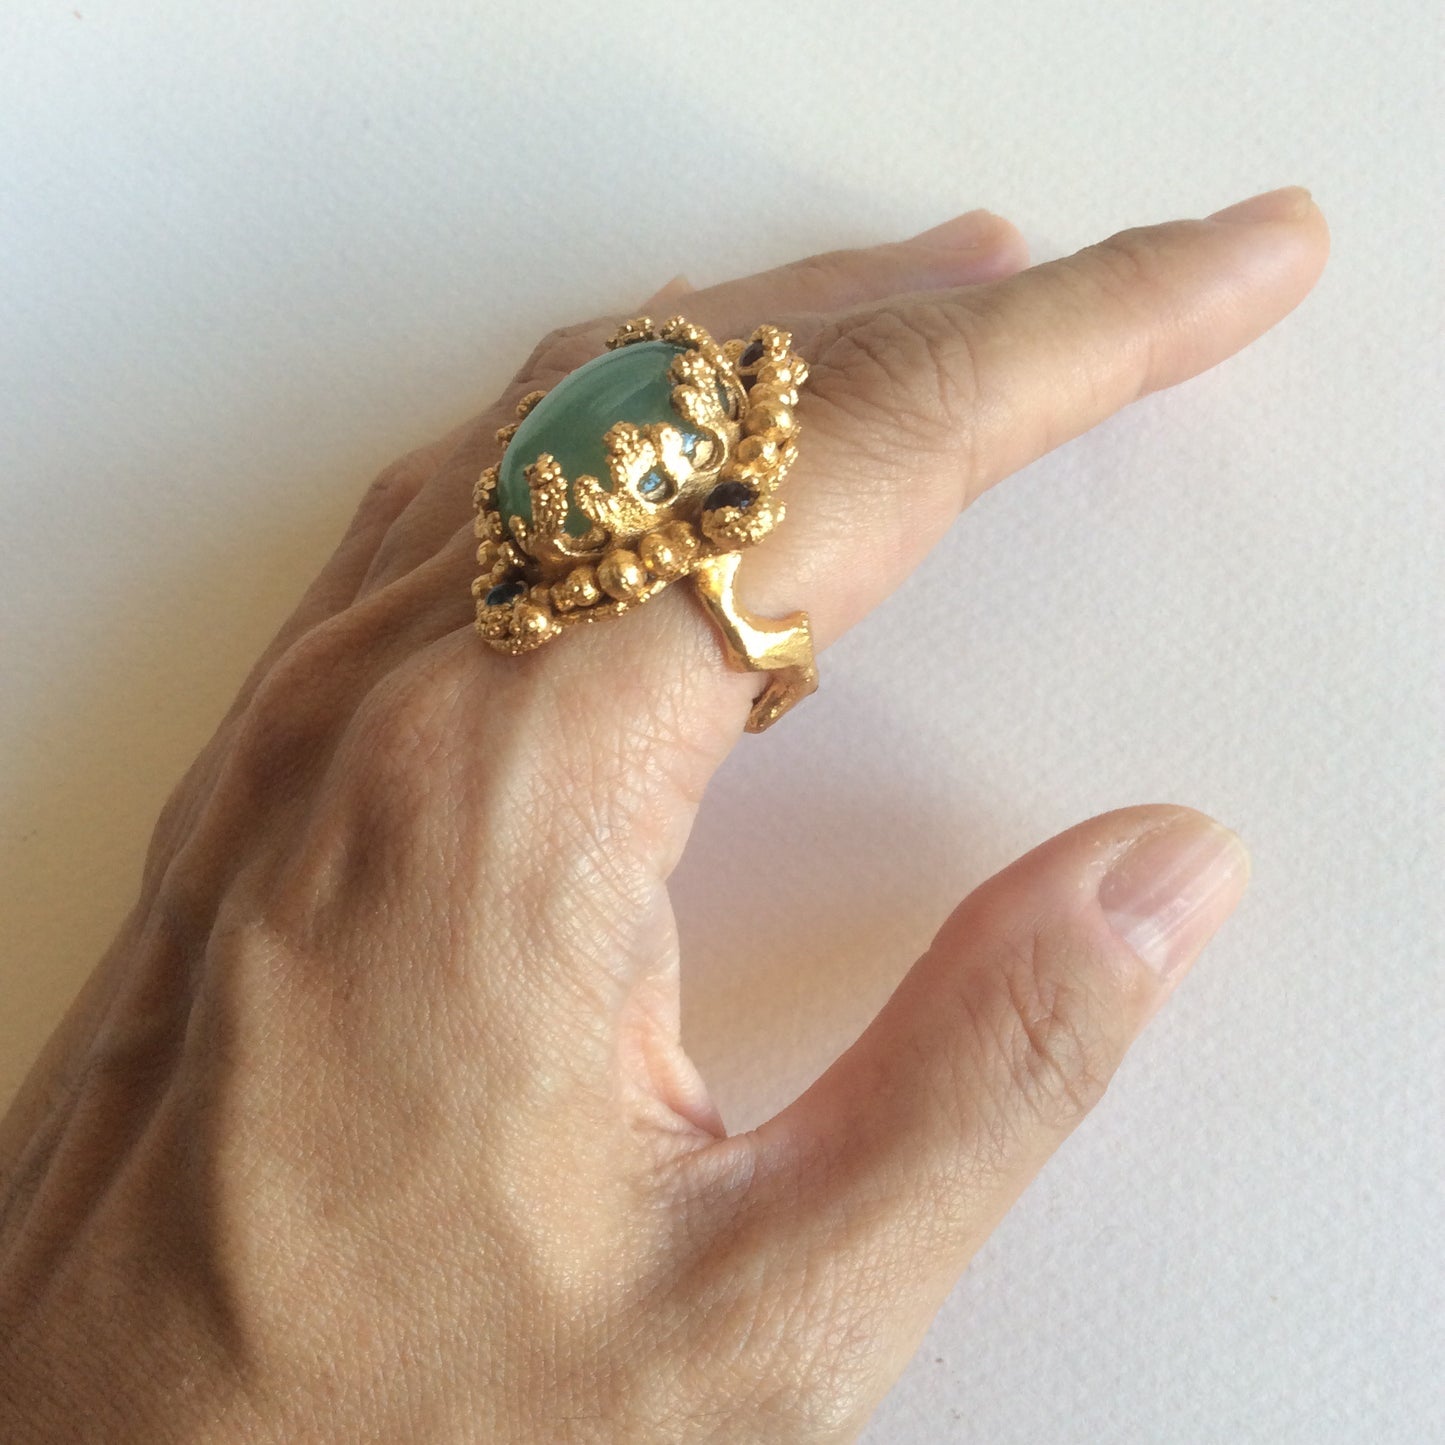 Ancient gold treasure bold statement ring